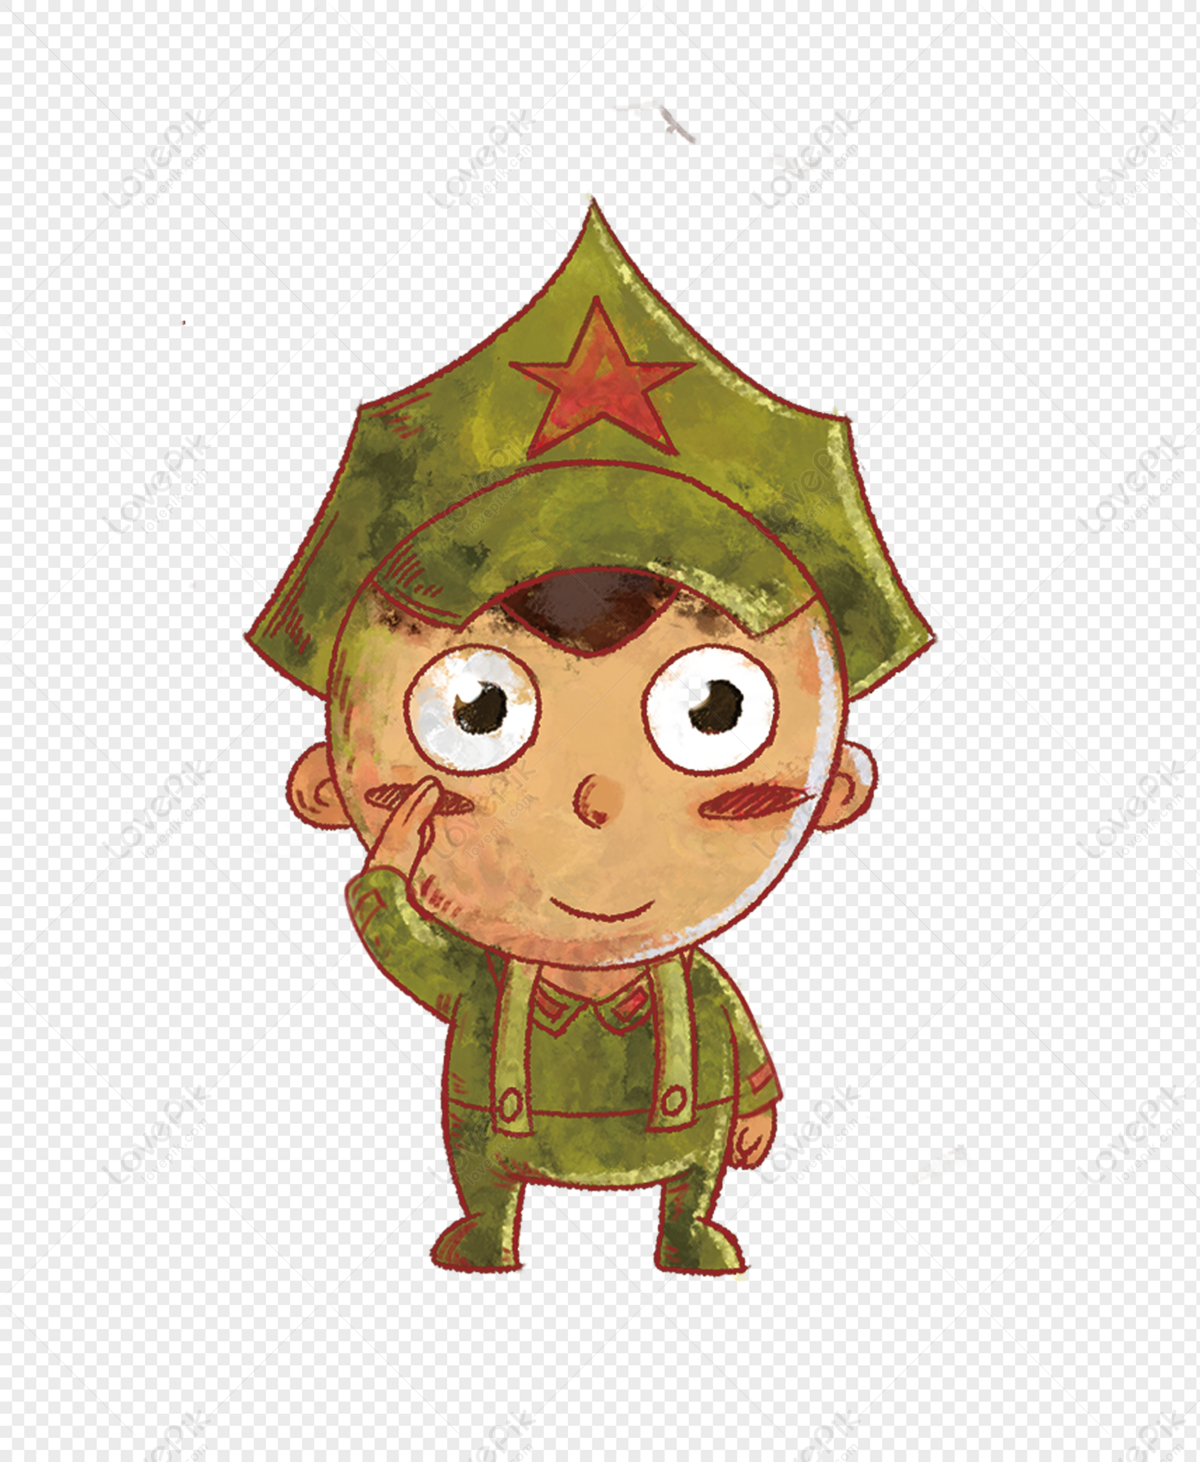 Cartoon Soldiers PNG Hd Transparent Image And Clipart Image For Free  Download - Lovepik | 400258134